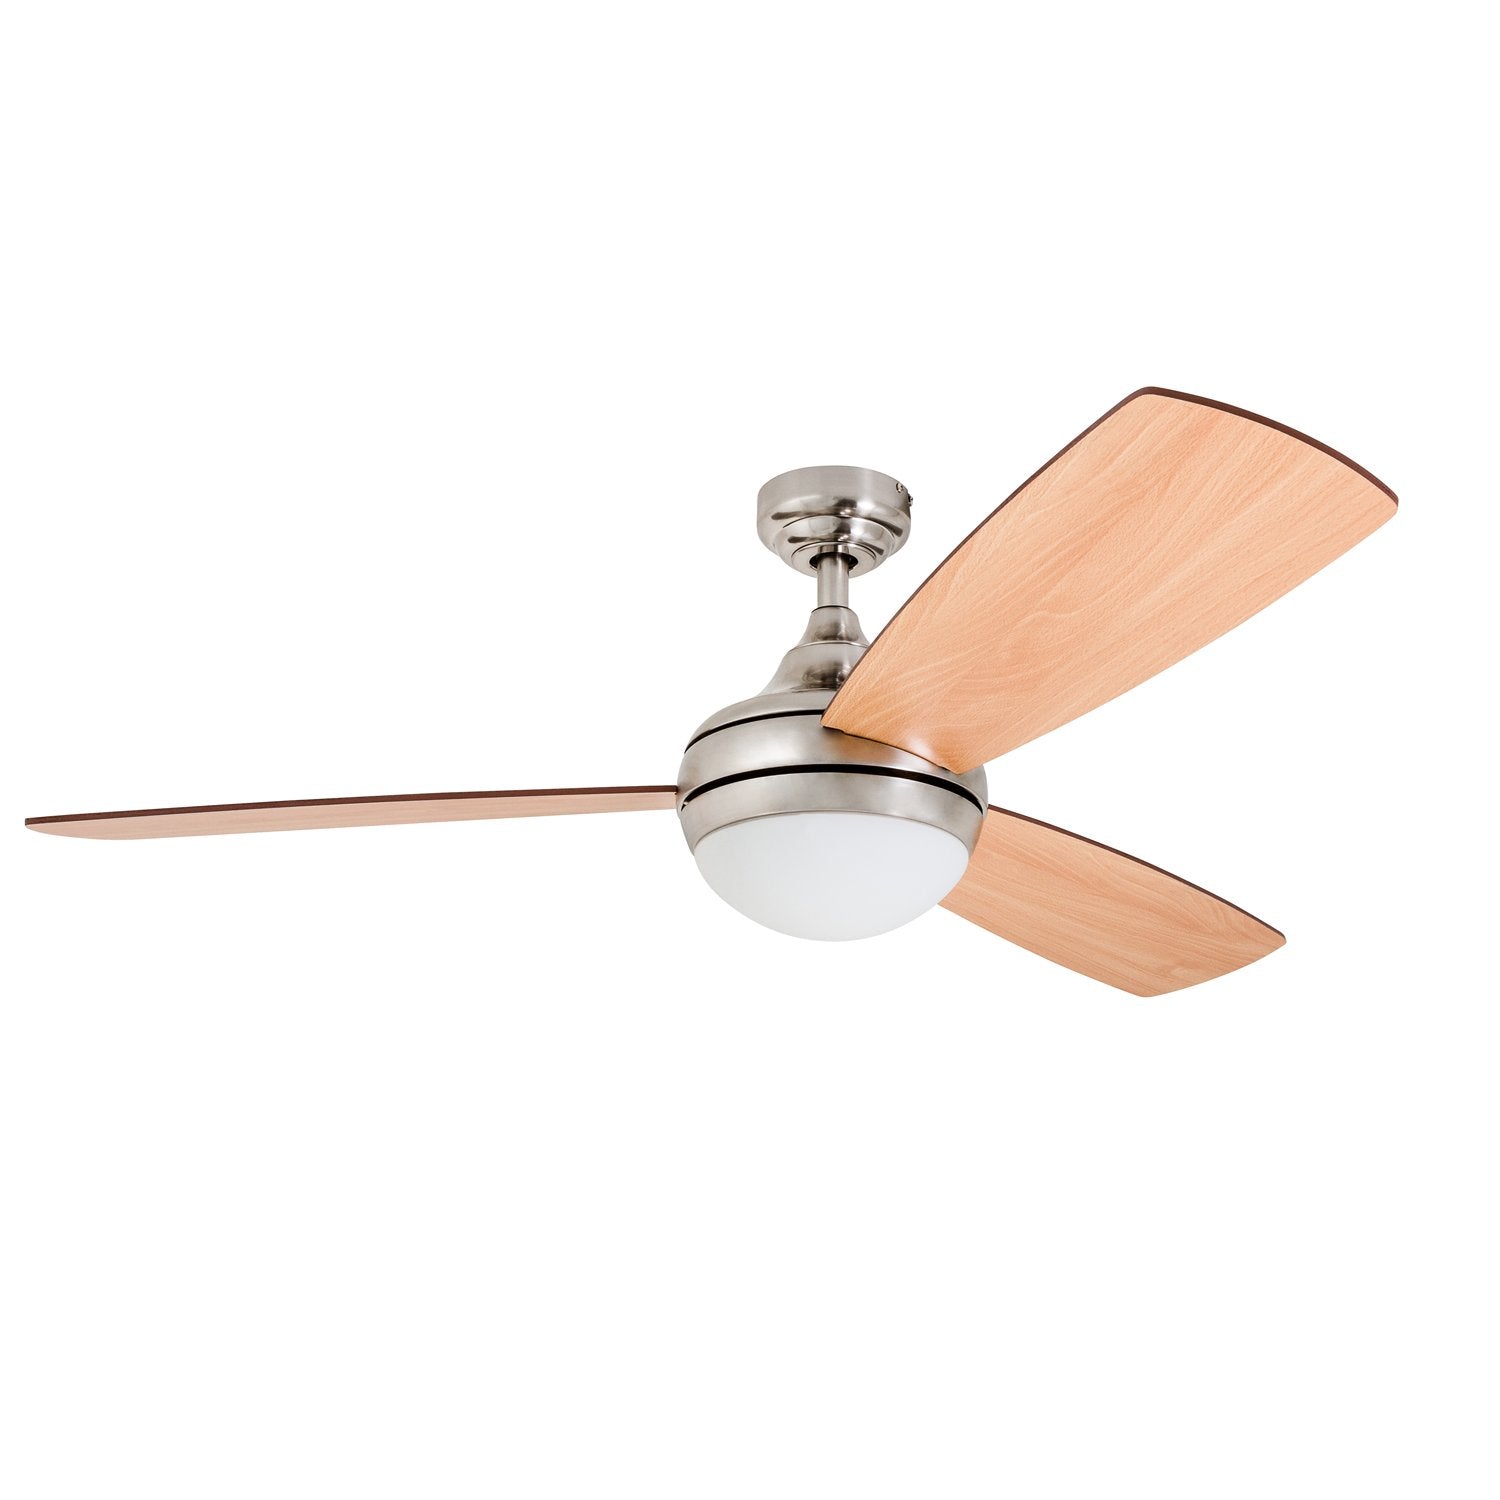 52 Inch Calico, Brushed Nickel, Remote Control, Ceiling Fan by Prominence Home